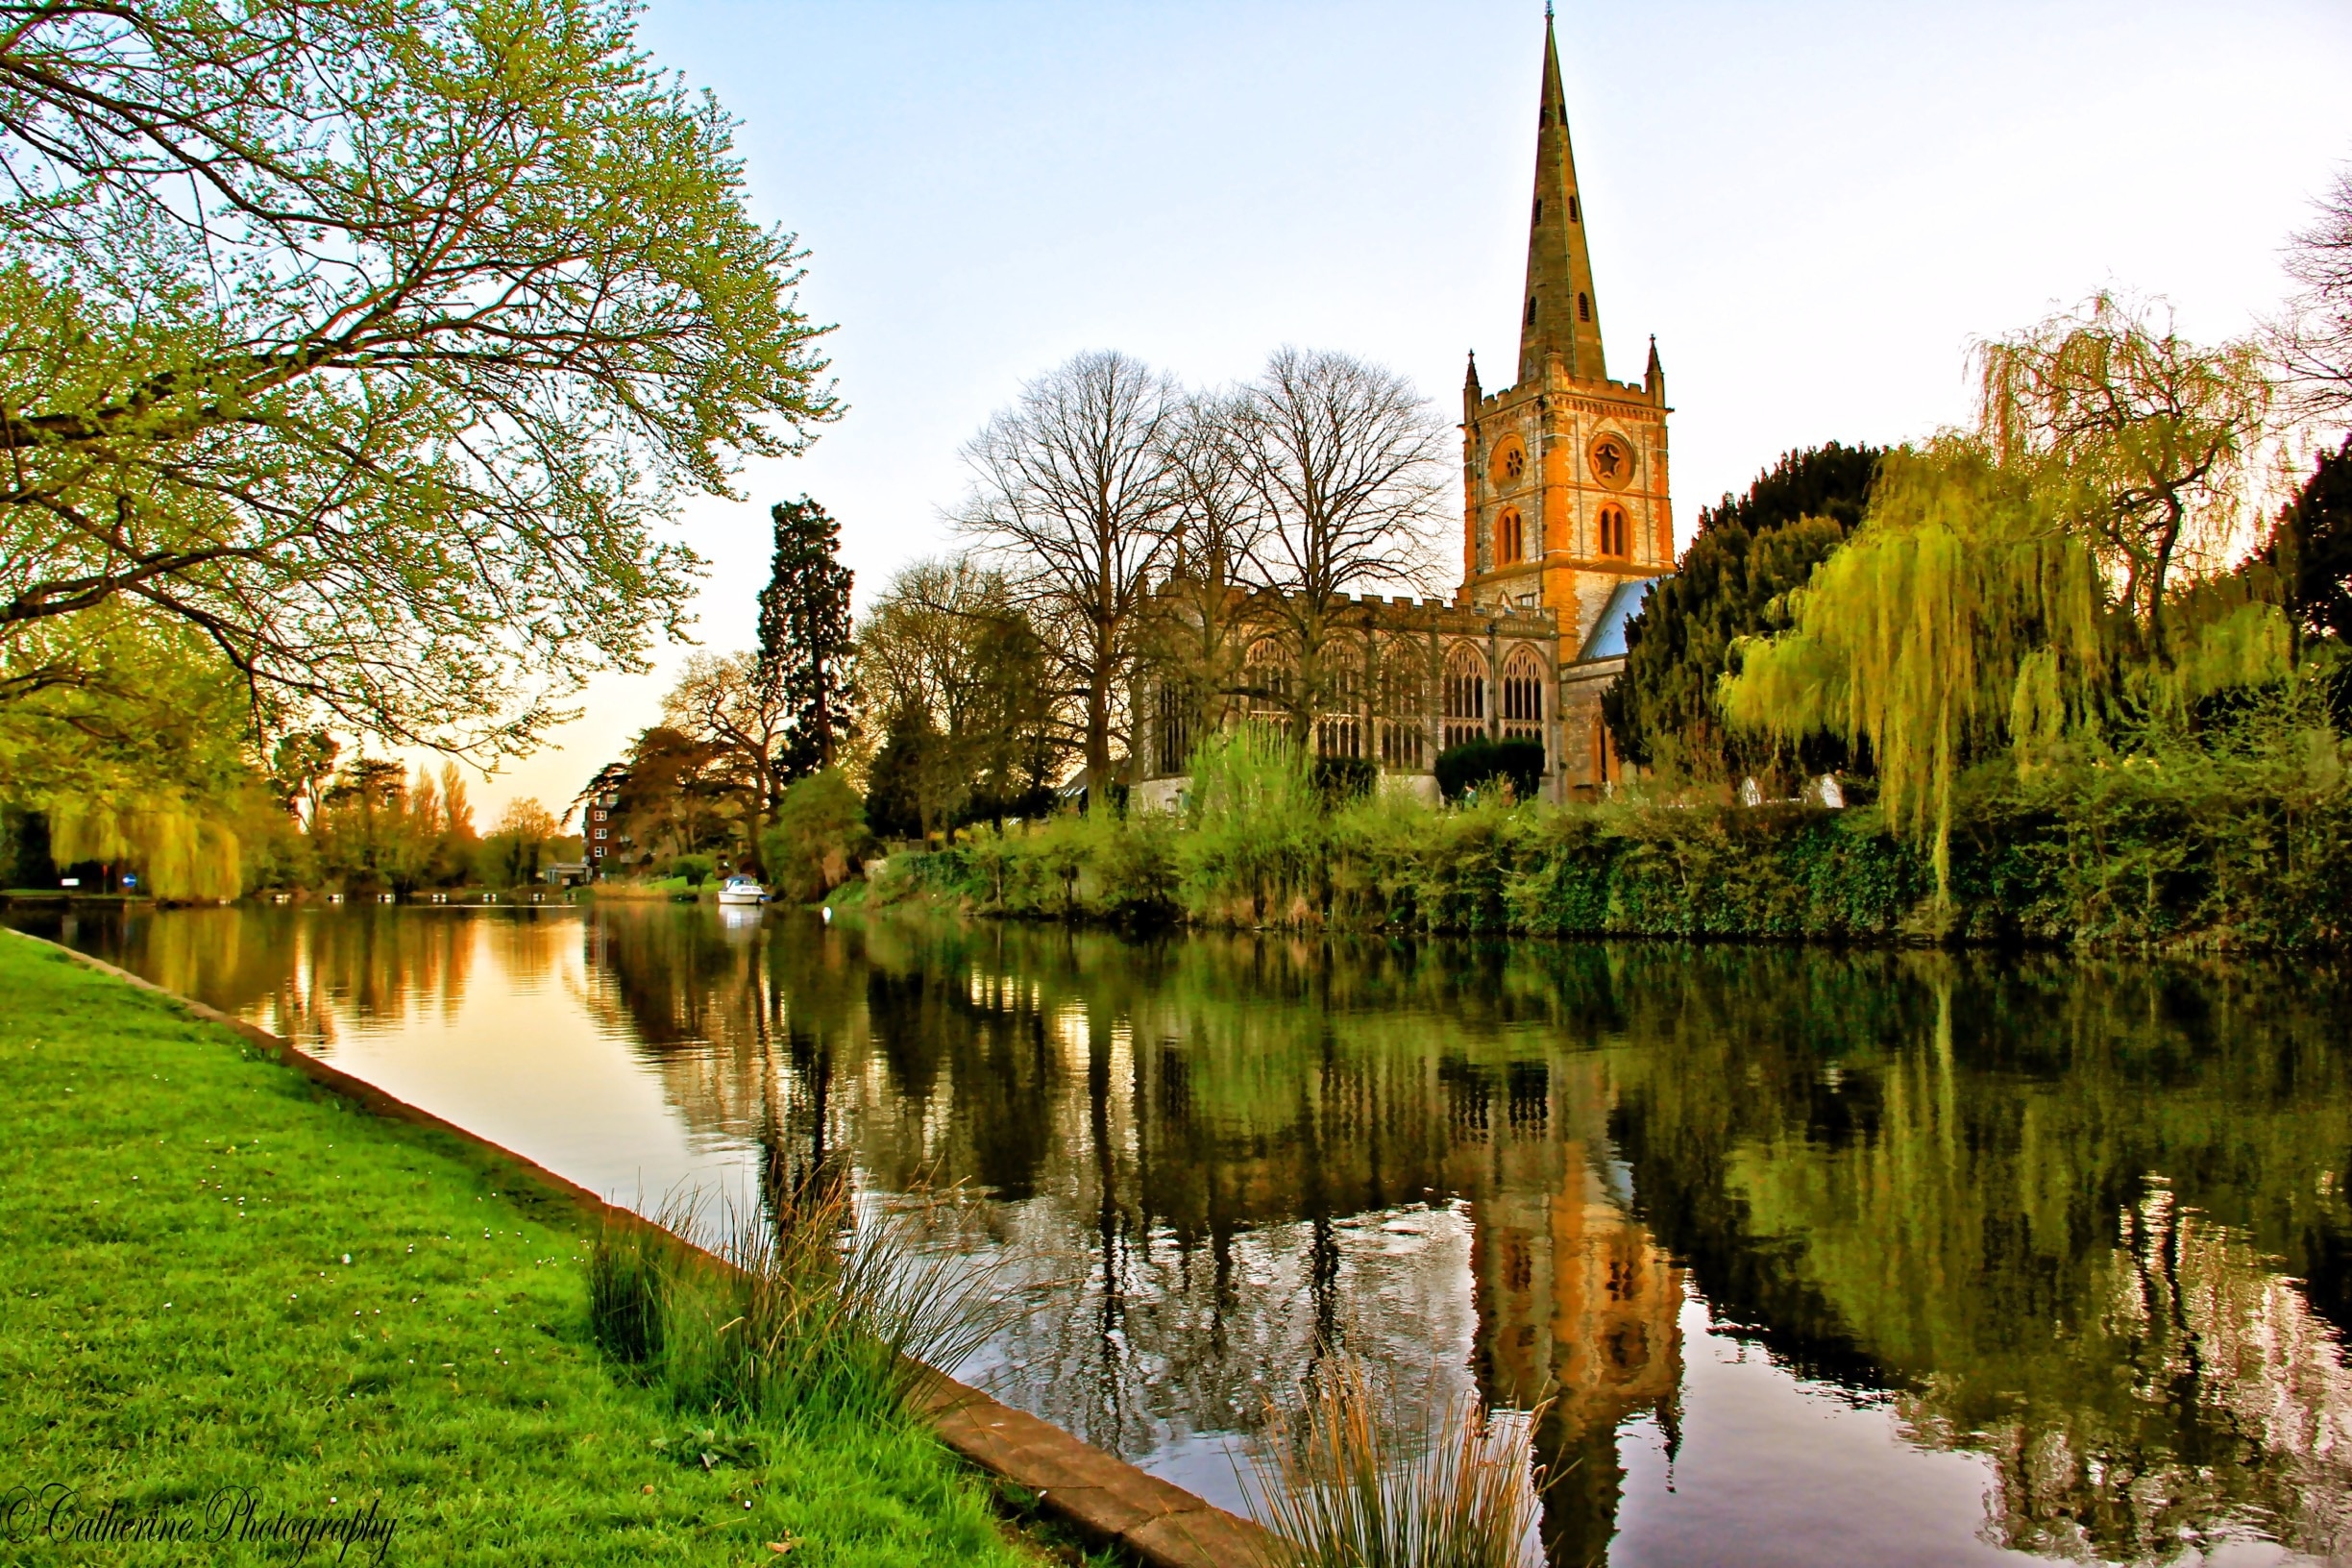 Stratford Upon Avon
At Stratford Upon Avon where there are lakes and longboats. The birth place of William Shakespeare. #red #travel #details #waterscape #nationalpark #hiking #reflections  #architecture 
